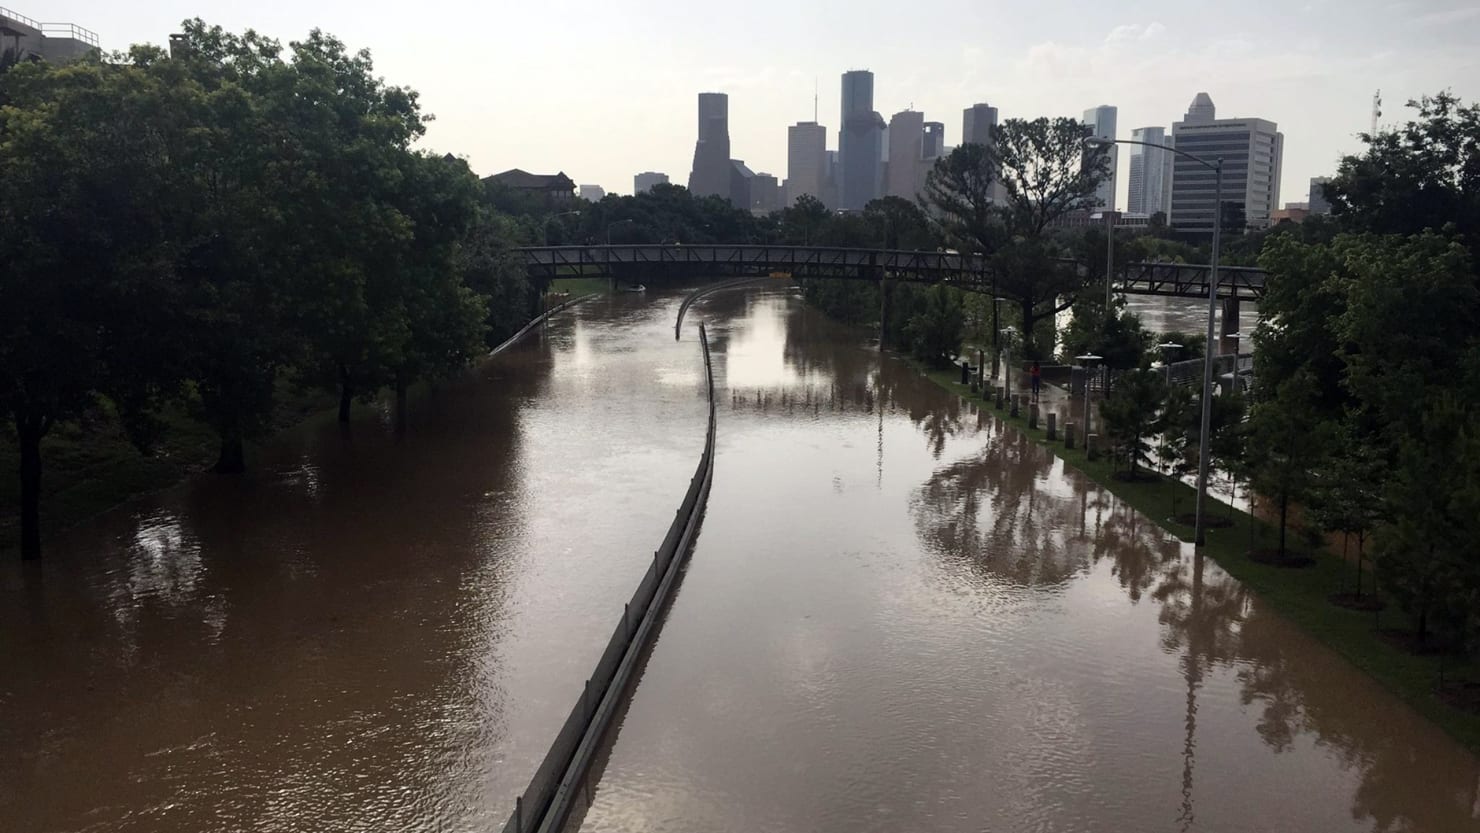 Flooded Chemical Site Blows, Burns Out of Control Near Houston1480 x 833